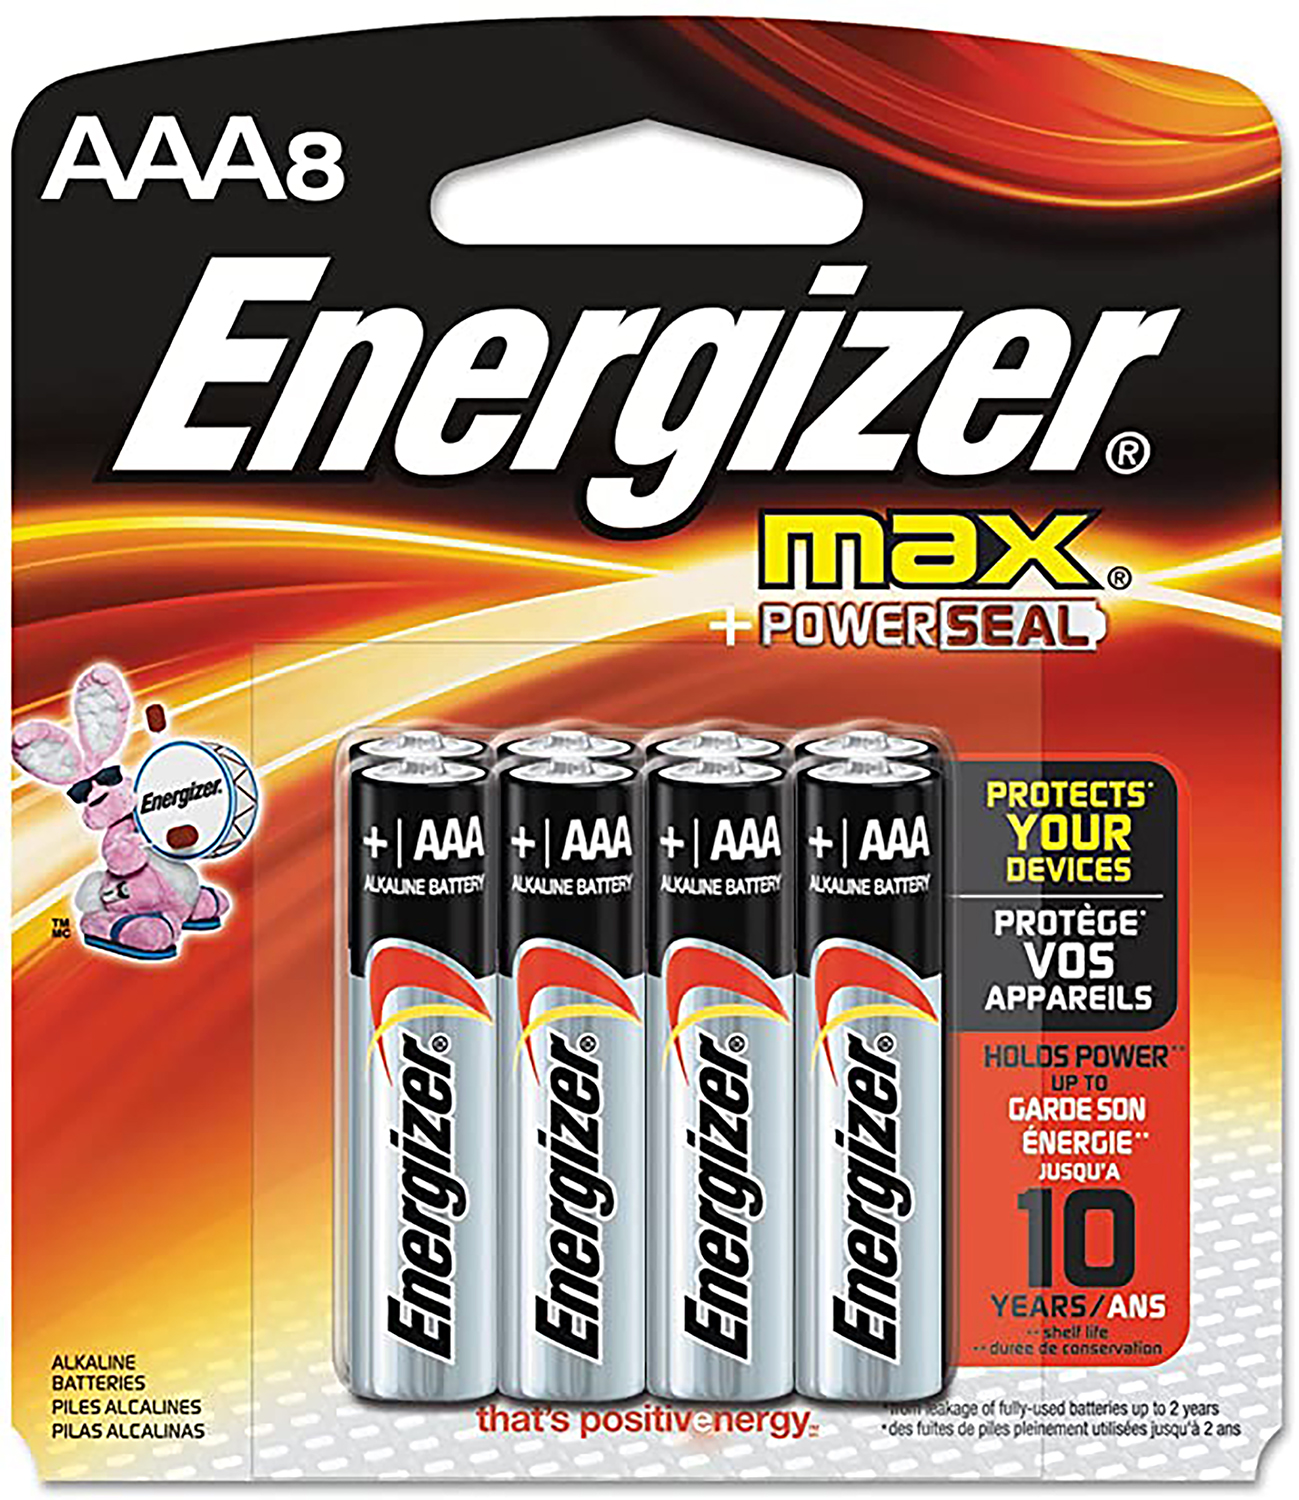 ENERGIZER MAX BATTERRIES AAA 8-PACK